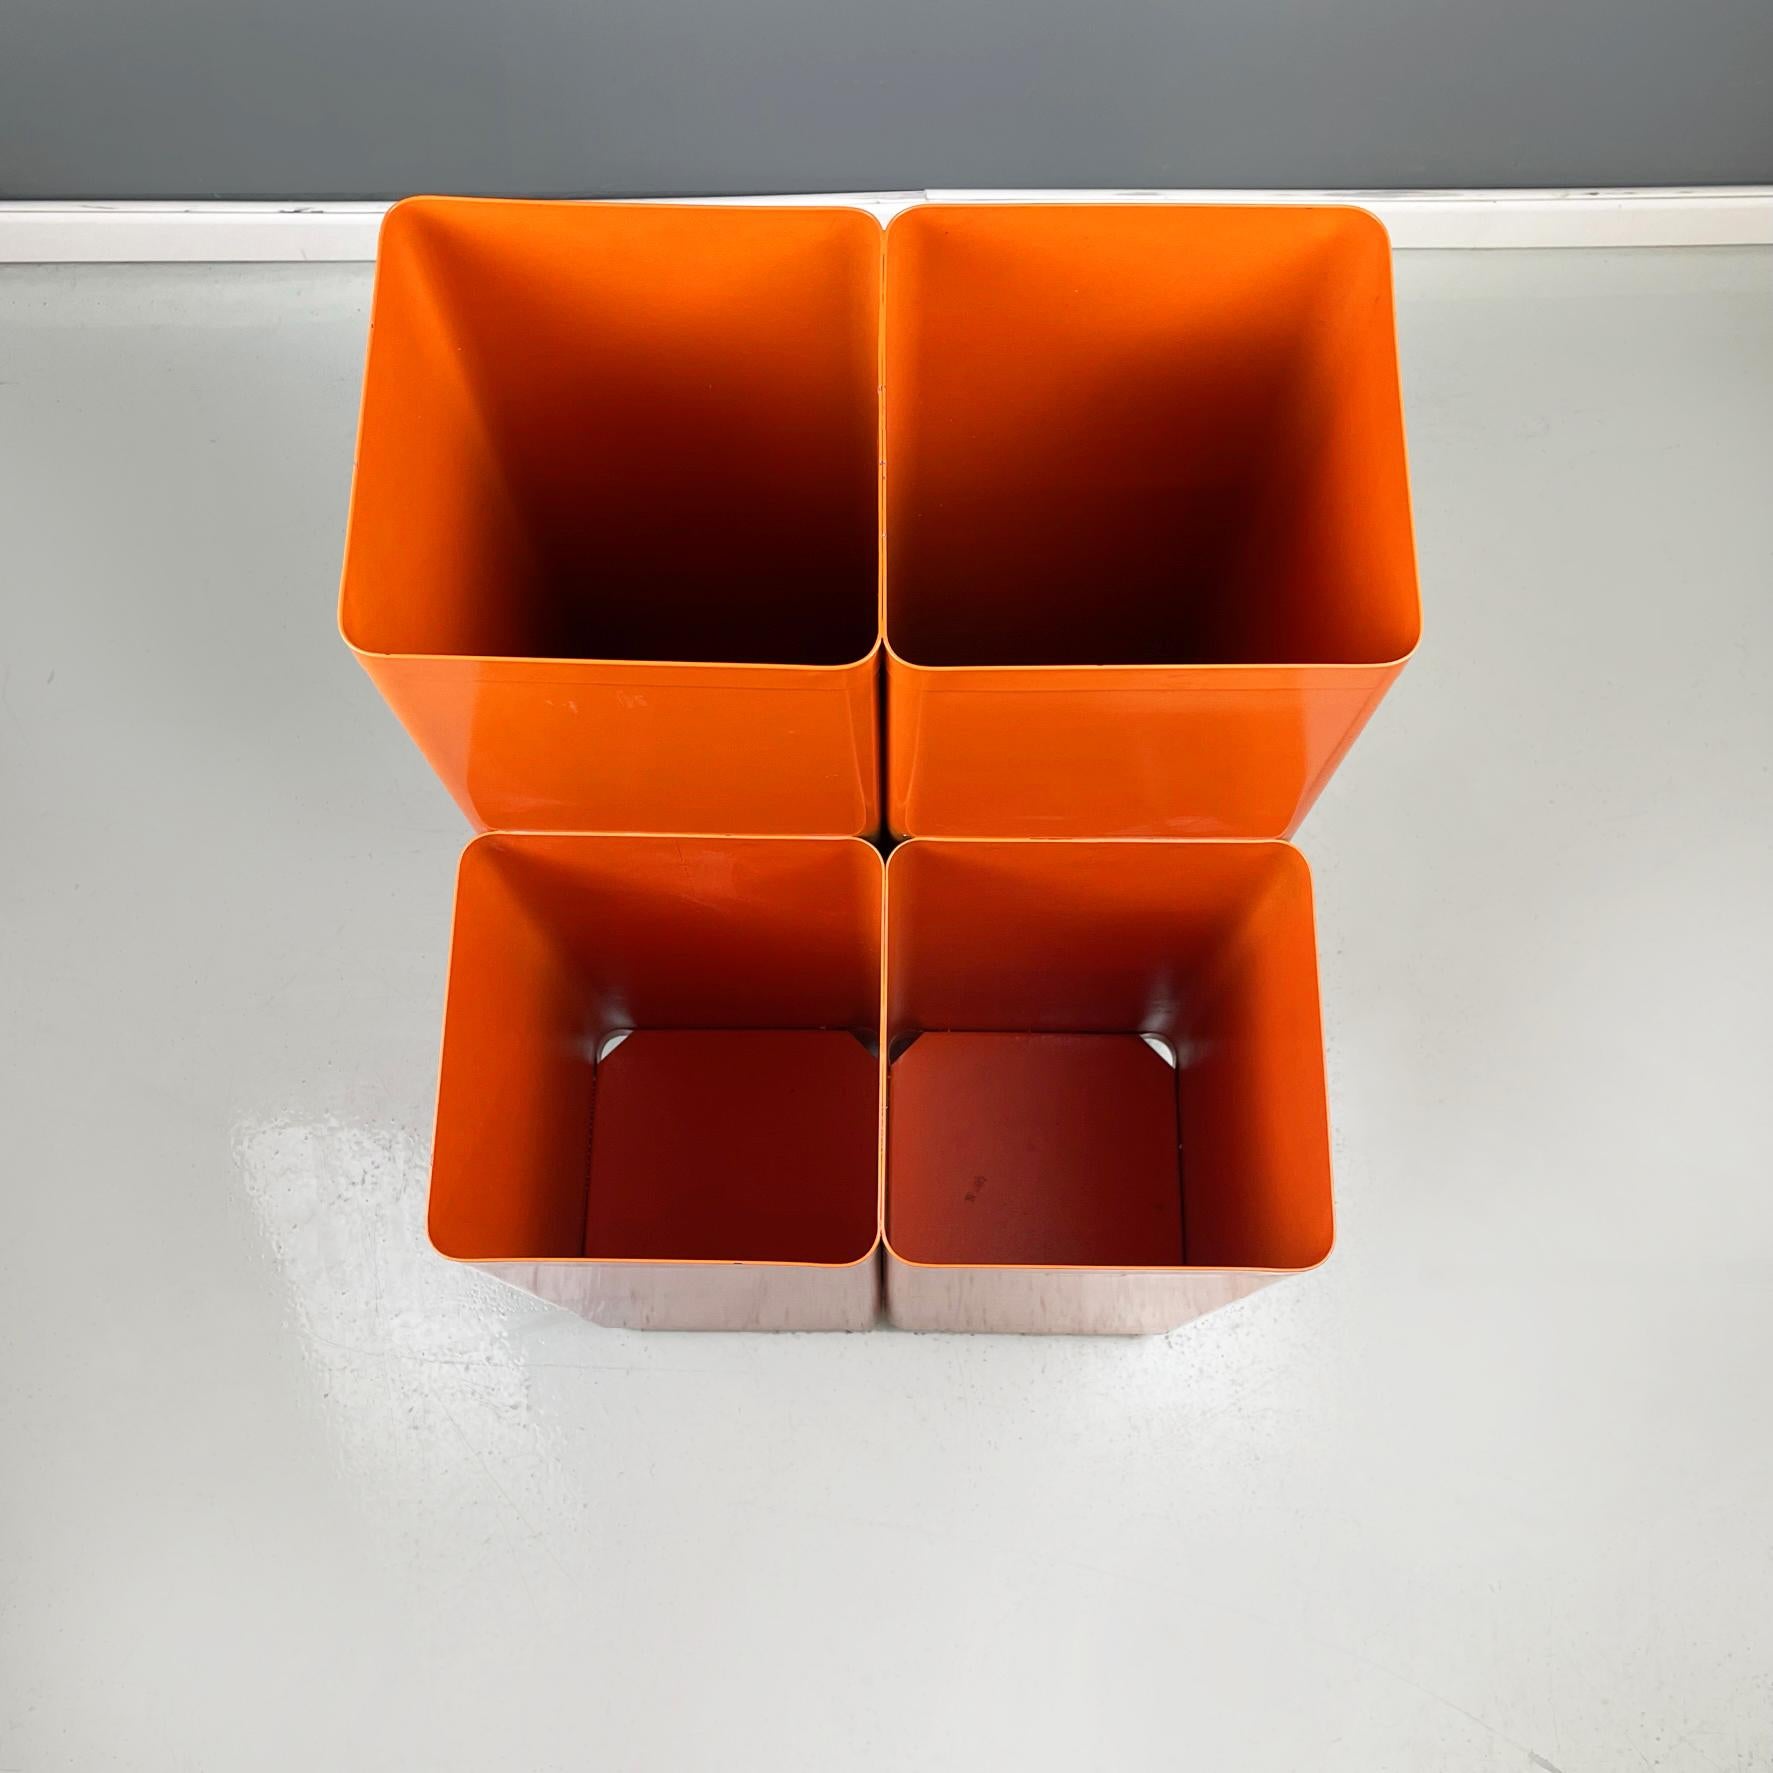 Late 20th Century Italian modern Square drawing roll holder in orange metal sheet by Neolt, 1980s For Sale